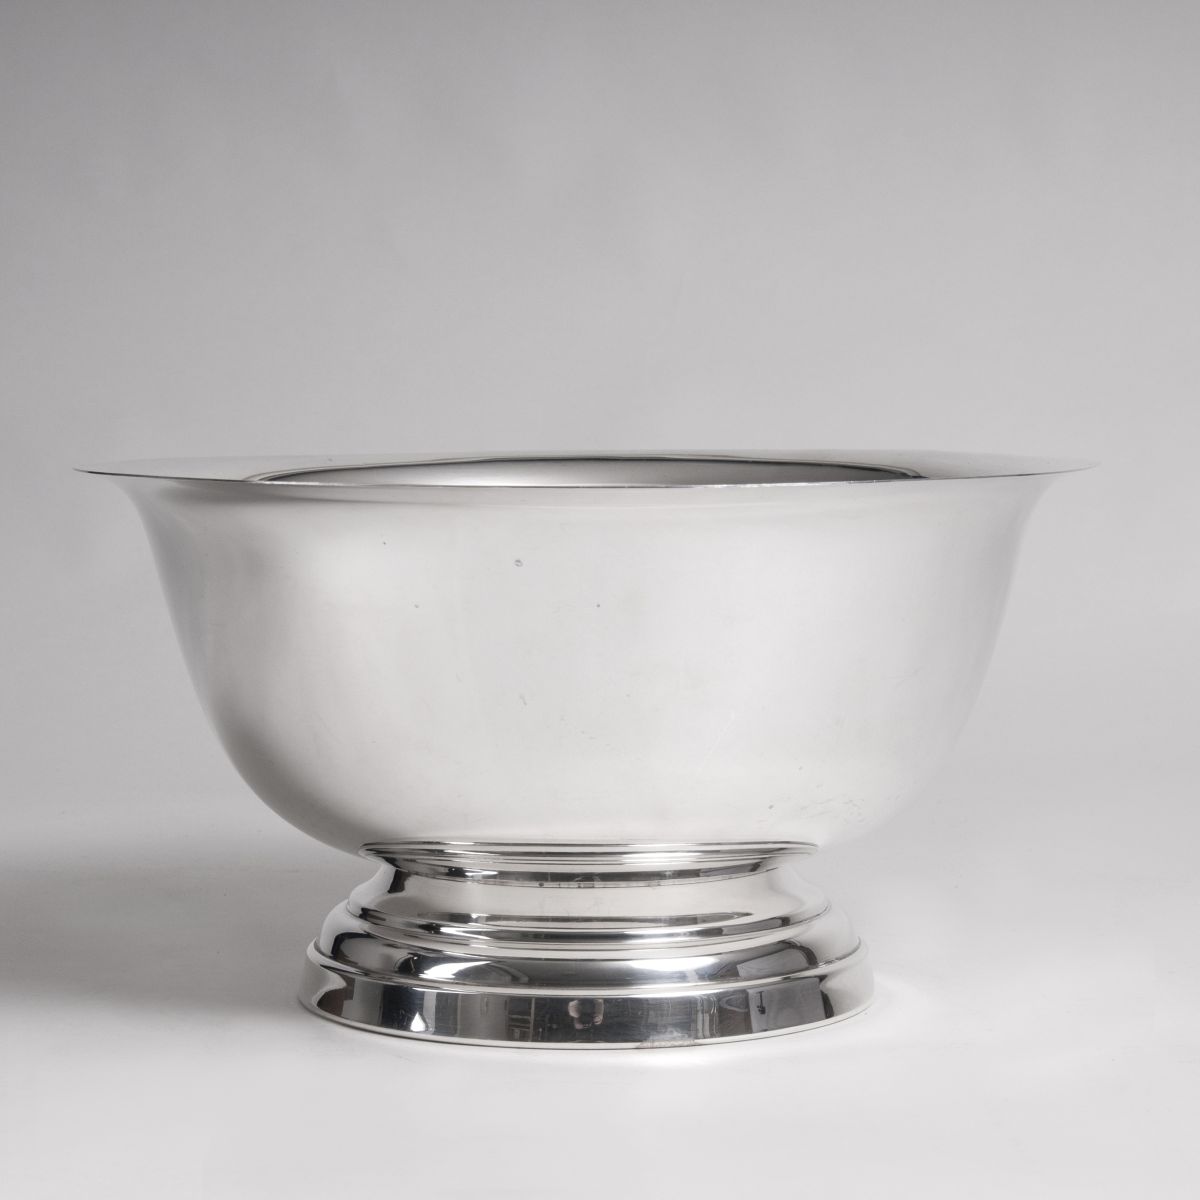 A large American bowl 'Paul Revere' by Poole Silver